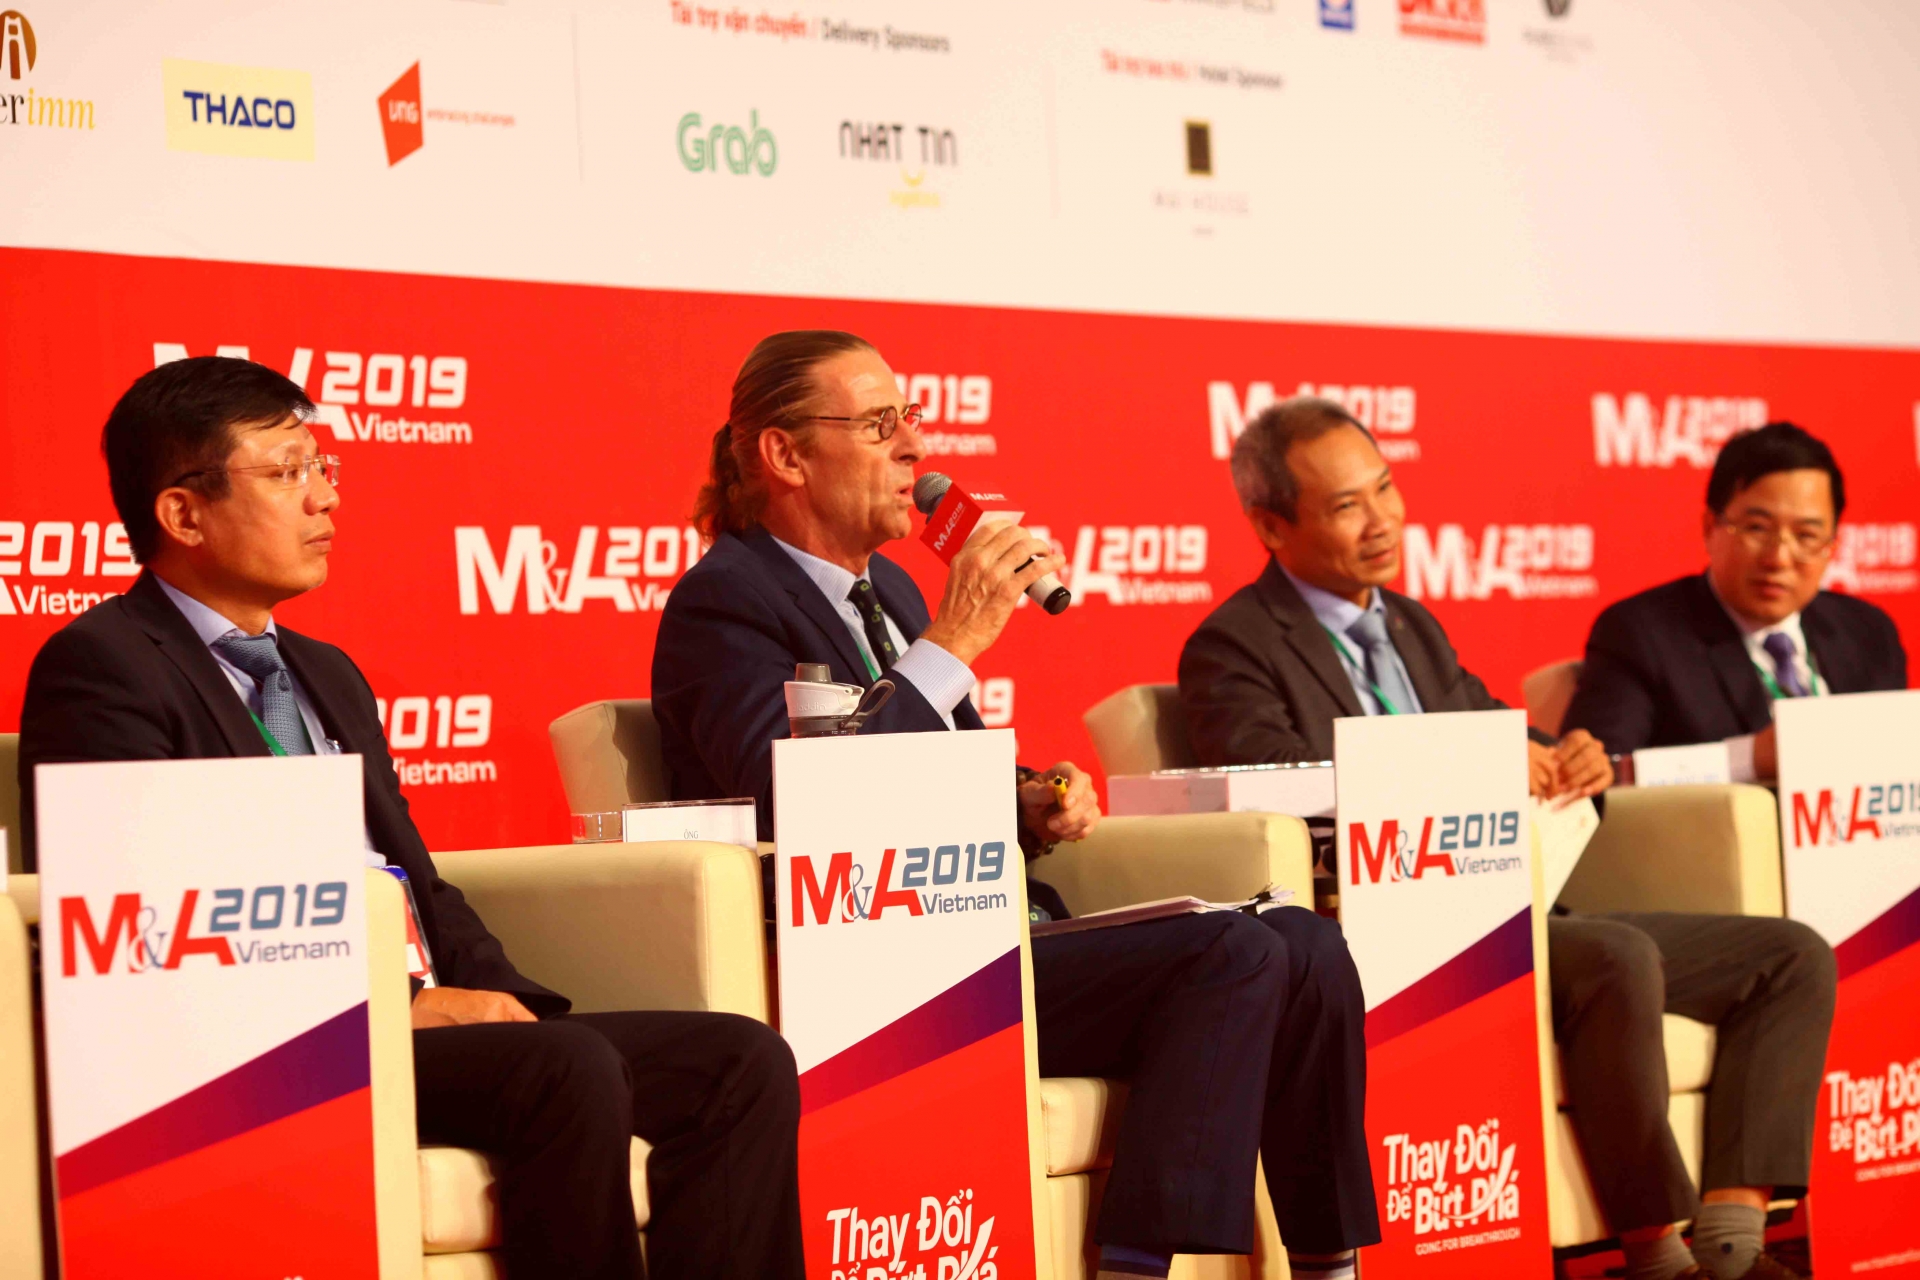 Policy reform is key to unlock Vietnam's M&A future